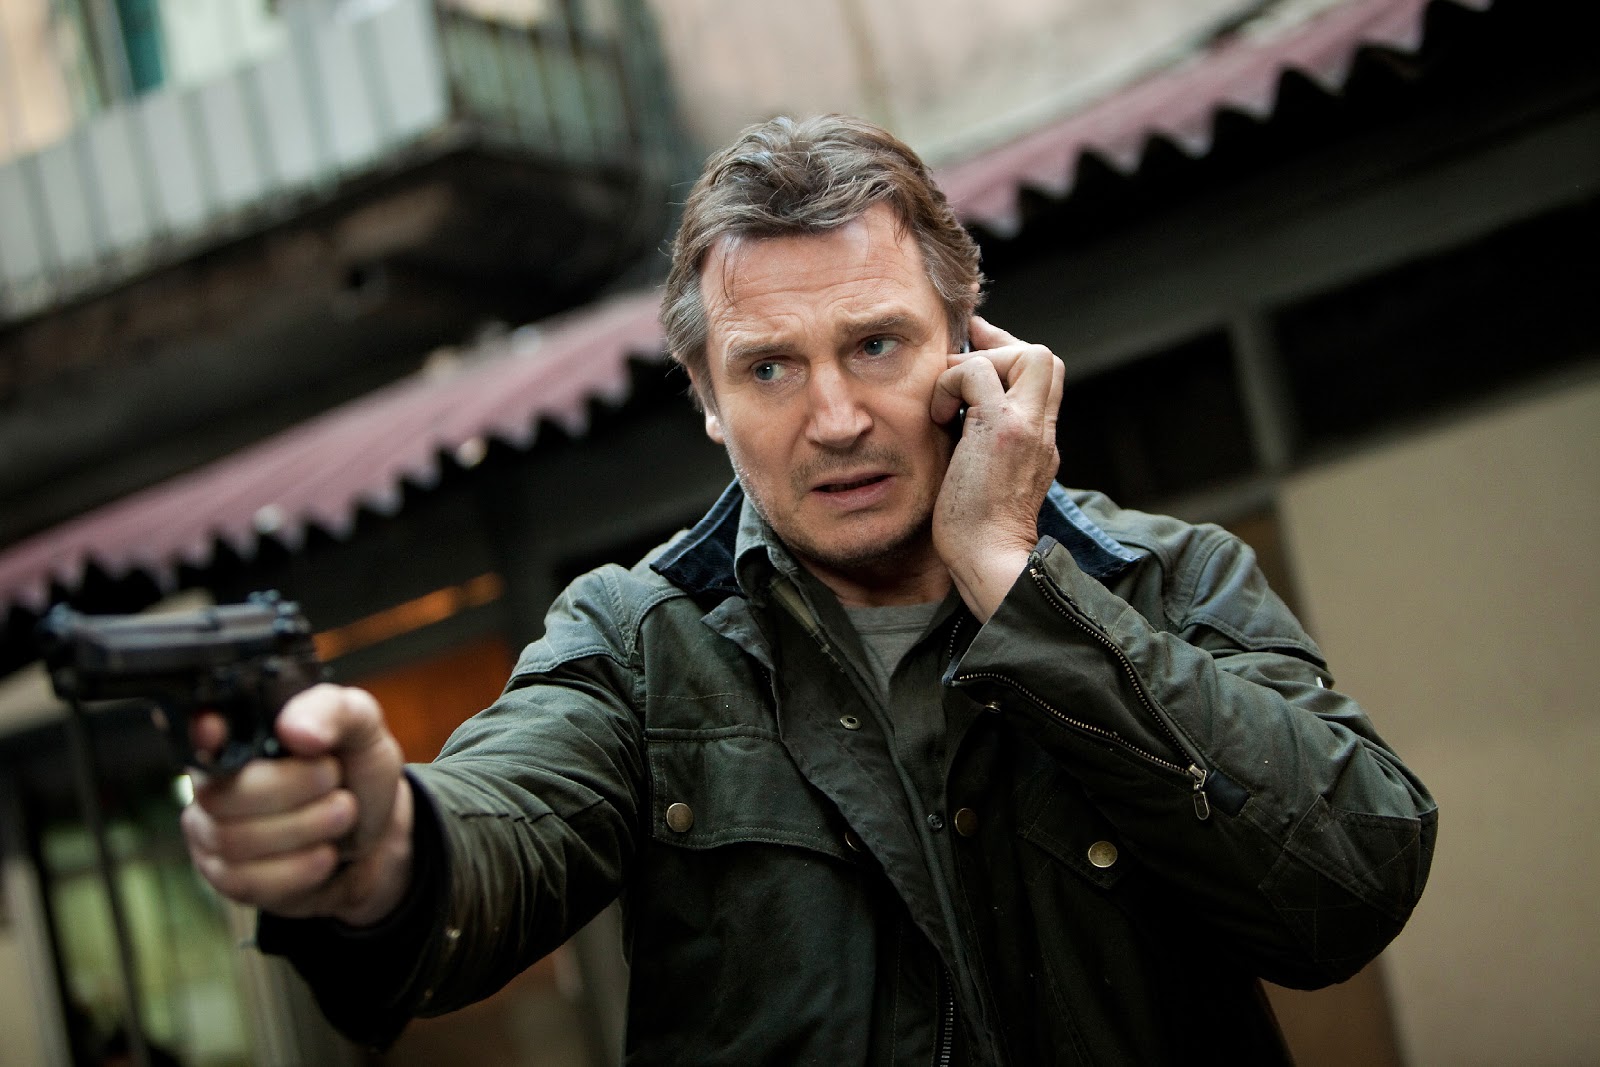 Liam Neeson is still kicking butt at 71 in the trailer for his new action  movie Retribution